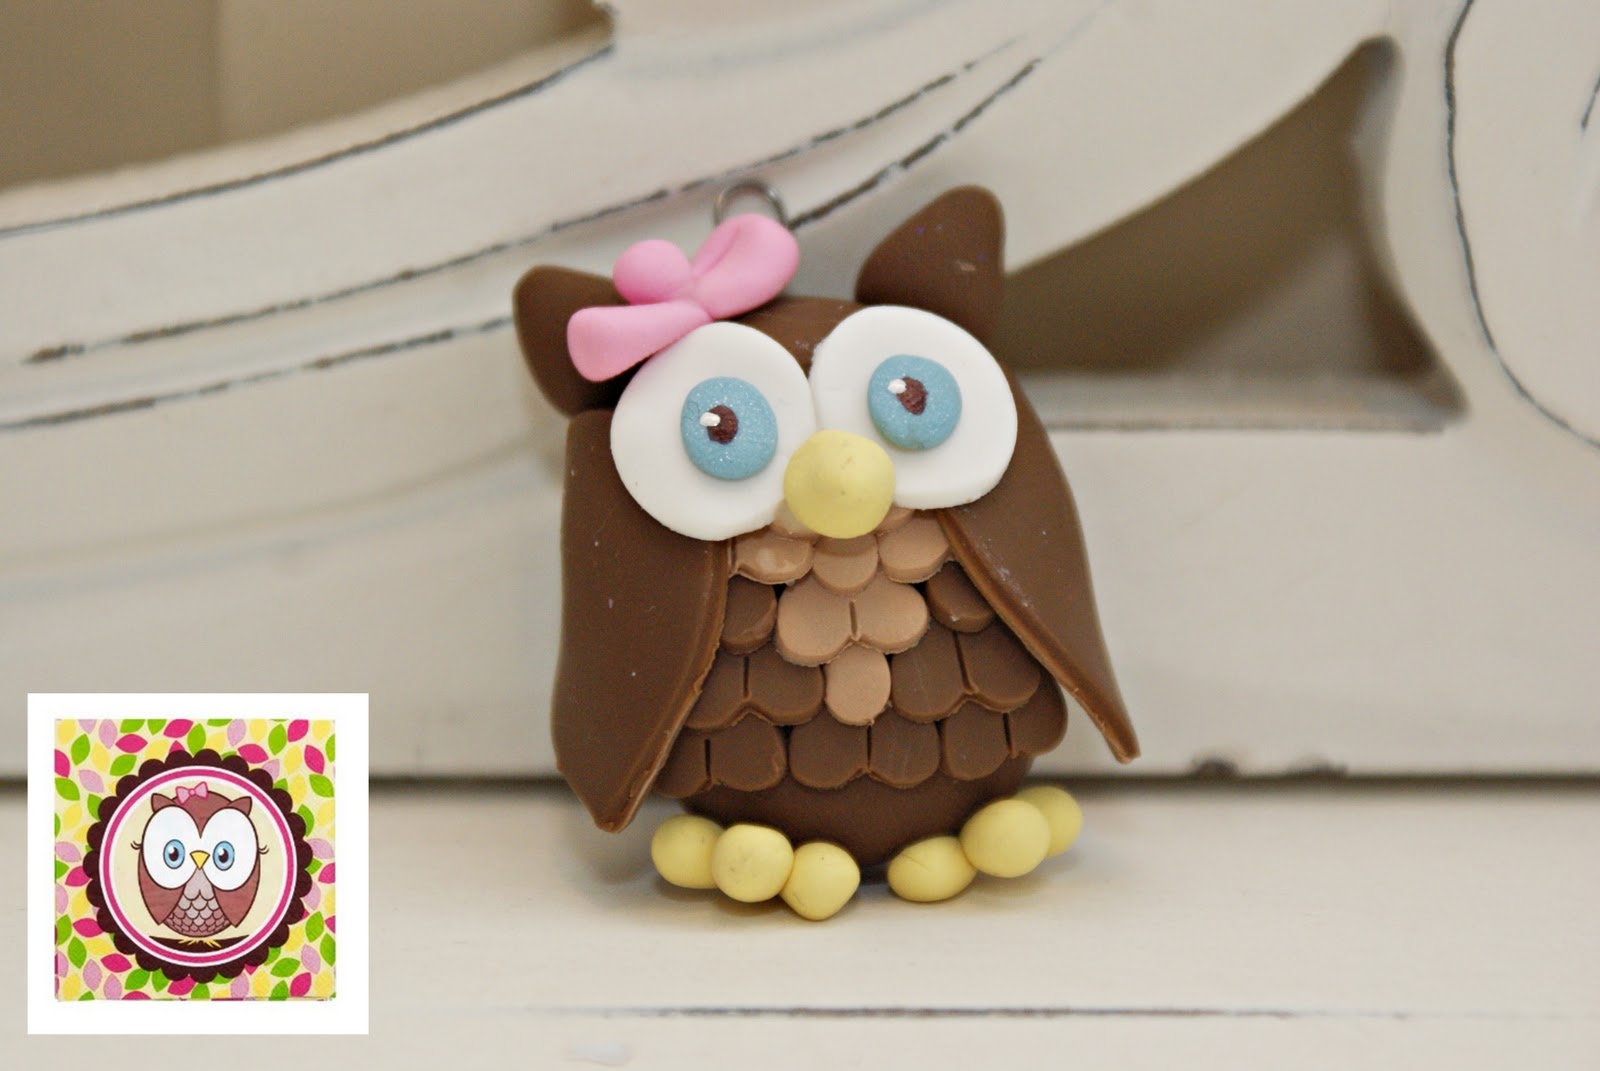 ... sent me the cartoon photo of the owl and I created this ornament